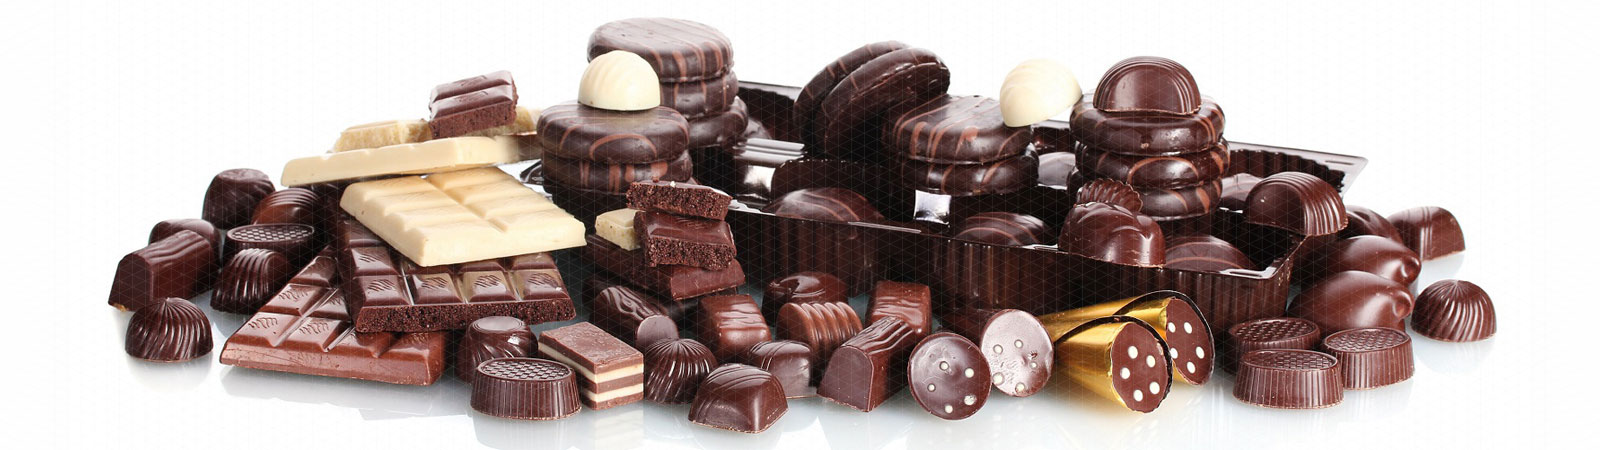 Machines for producing and packaging Chocolate & Confectionery